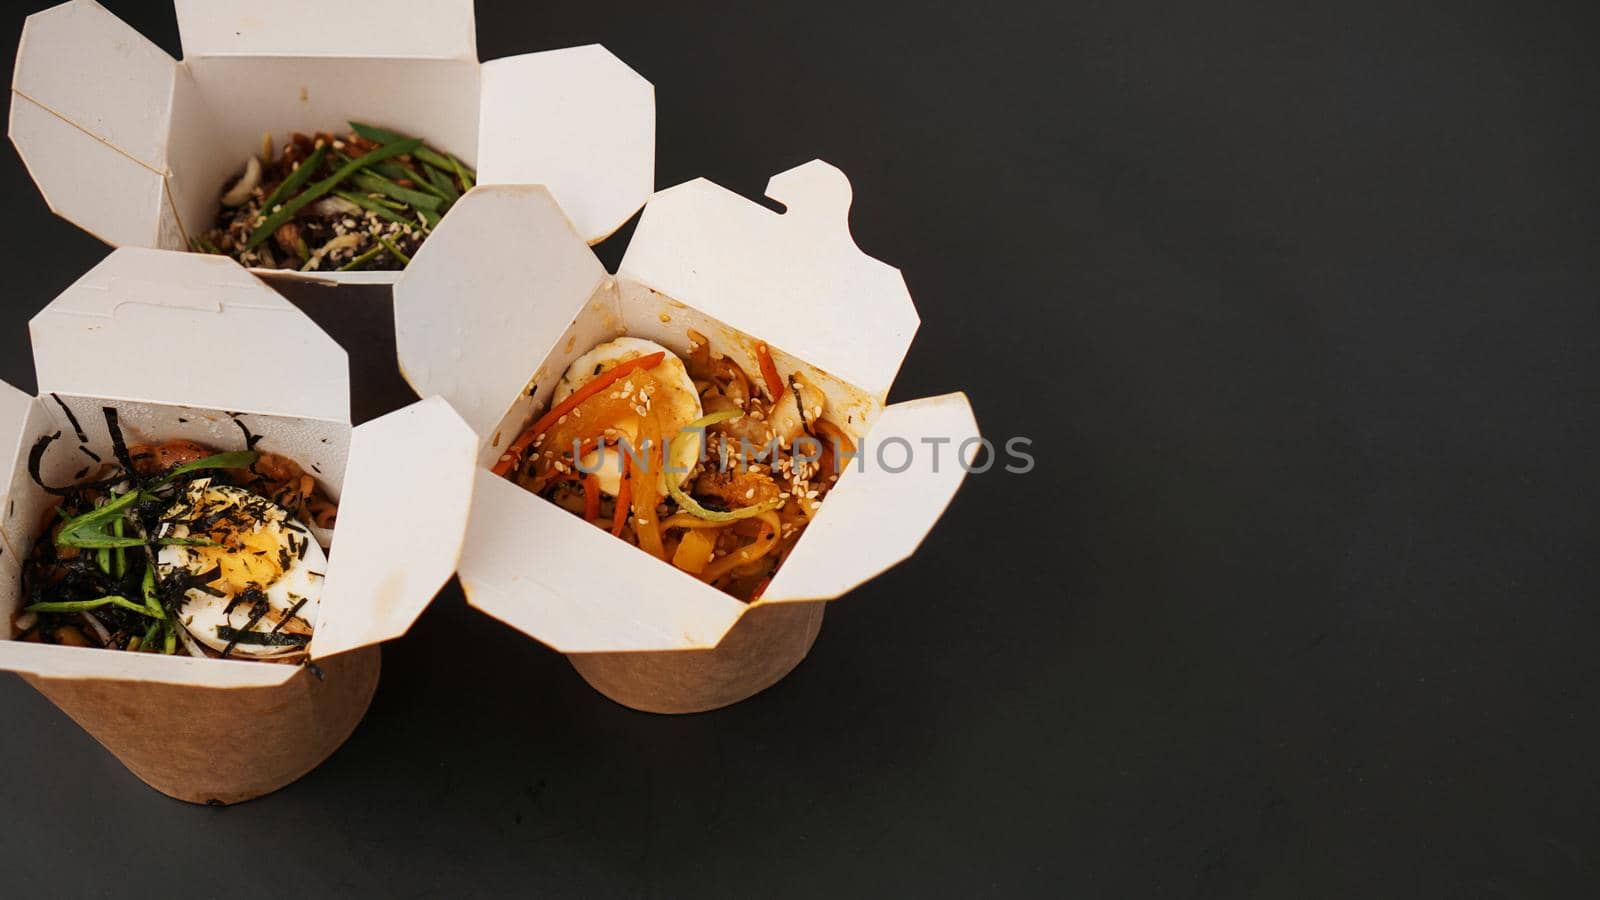 Noodles with pork and vegetables in take-out box on black table. Asian food delivery. Food in paper containers on black background